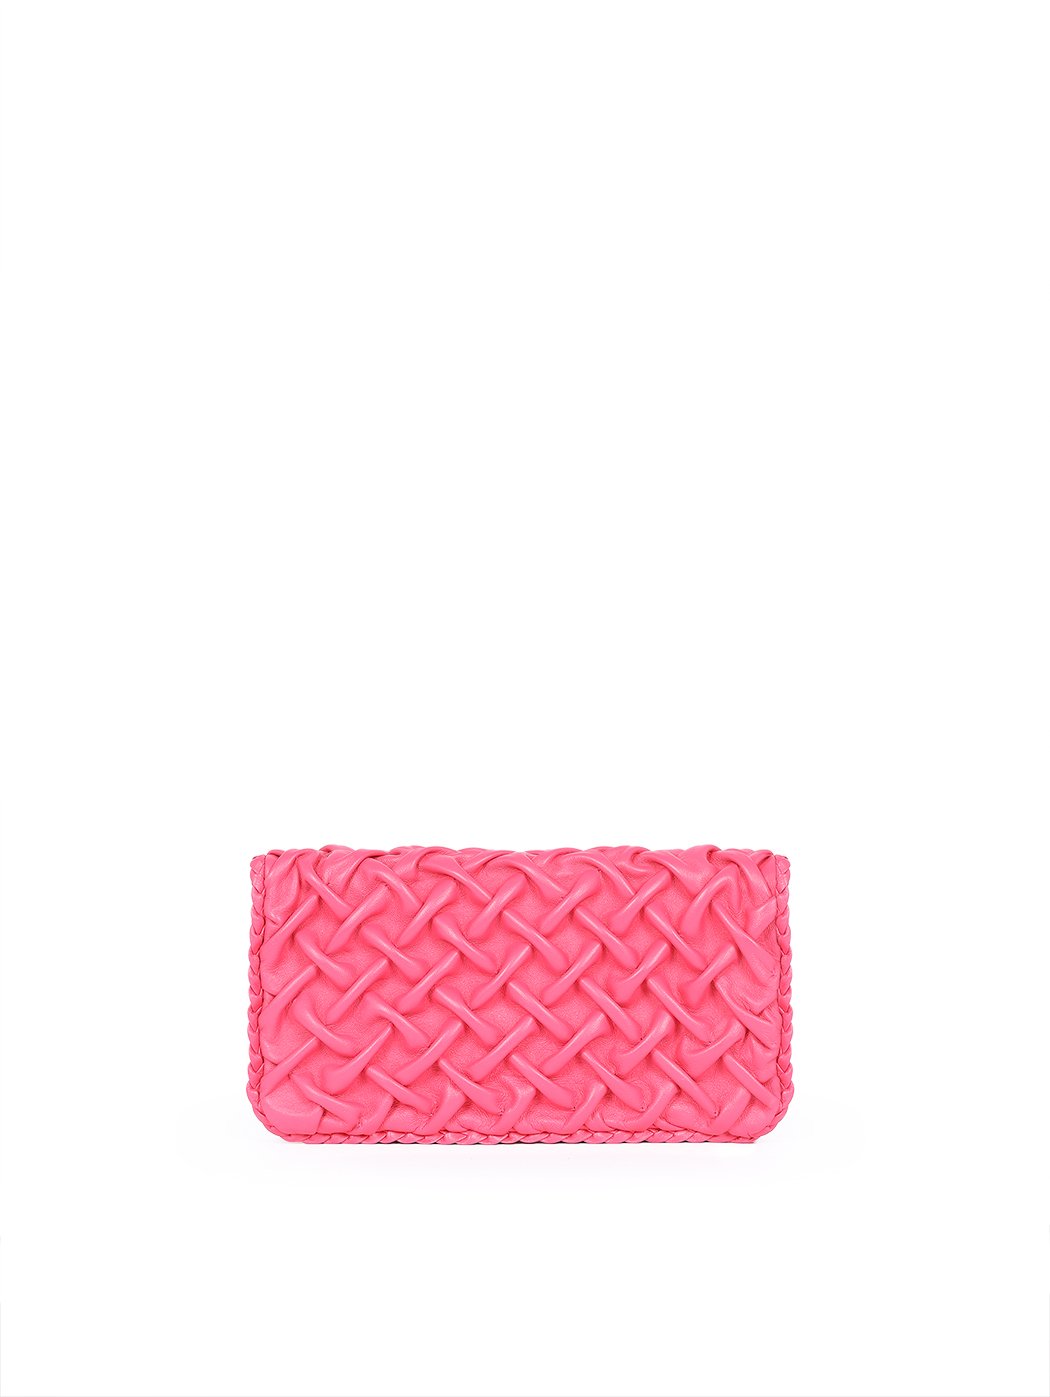 Foldover Crossbody Quilted Weave Clutch Leather Fuchsia